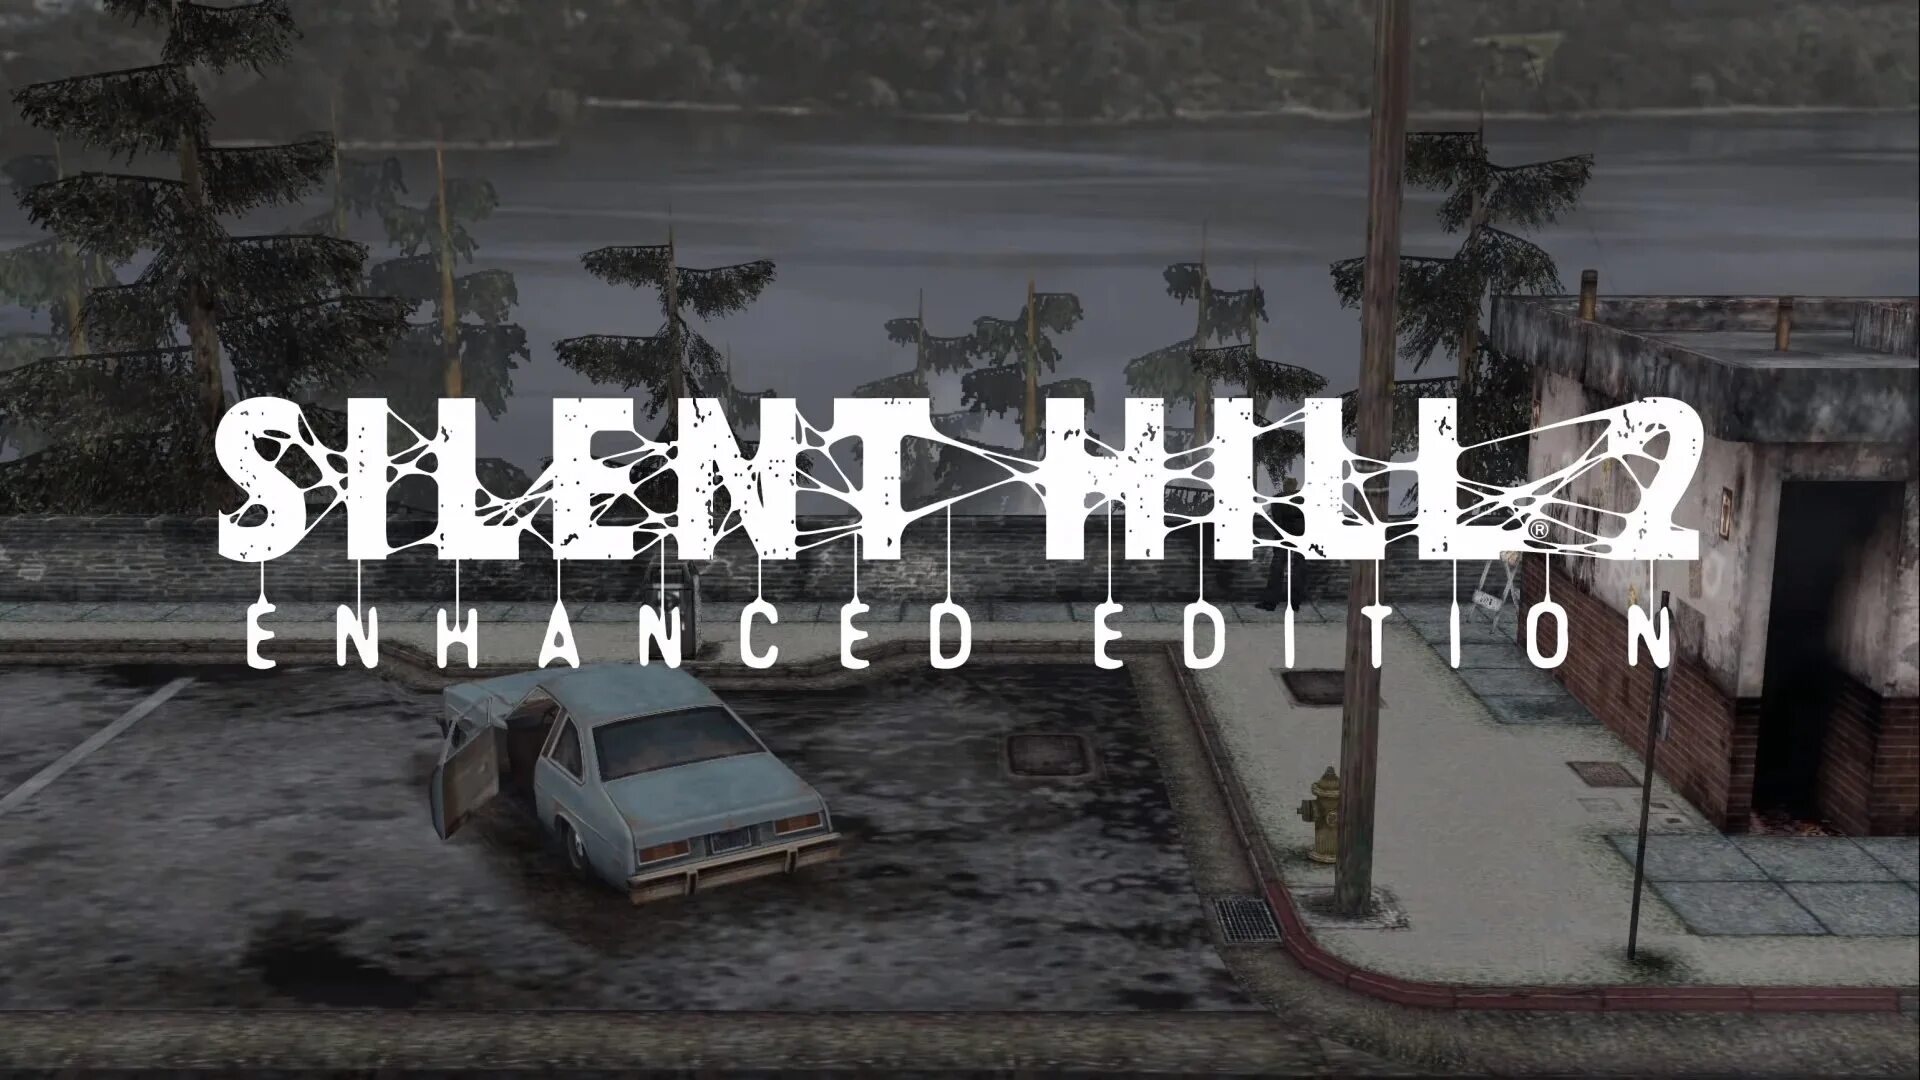 Silent Hill 2 Director's Cut New Edition: enhanced Edition. Silent hill director cut